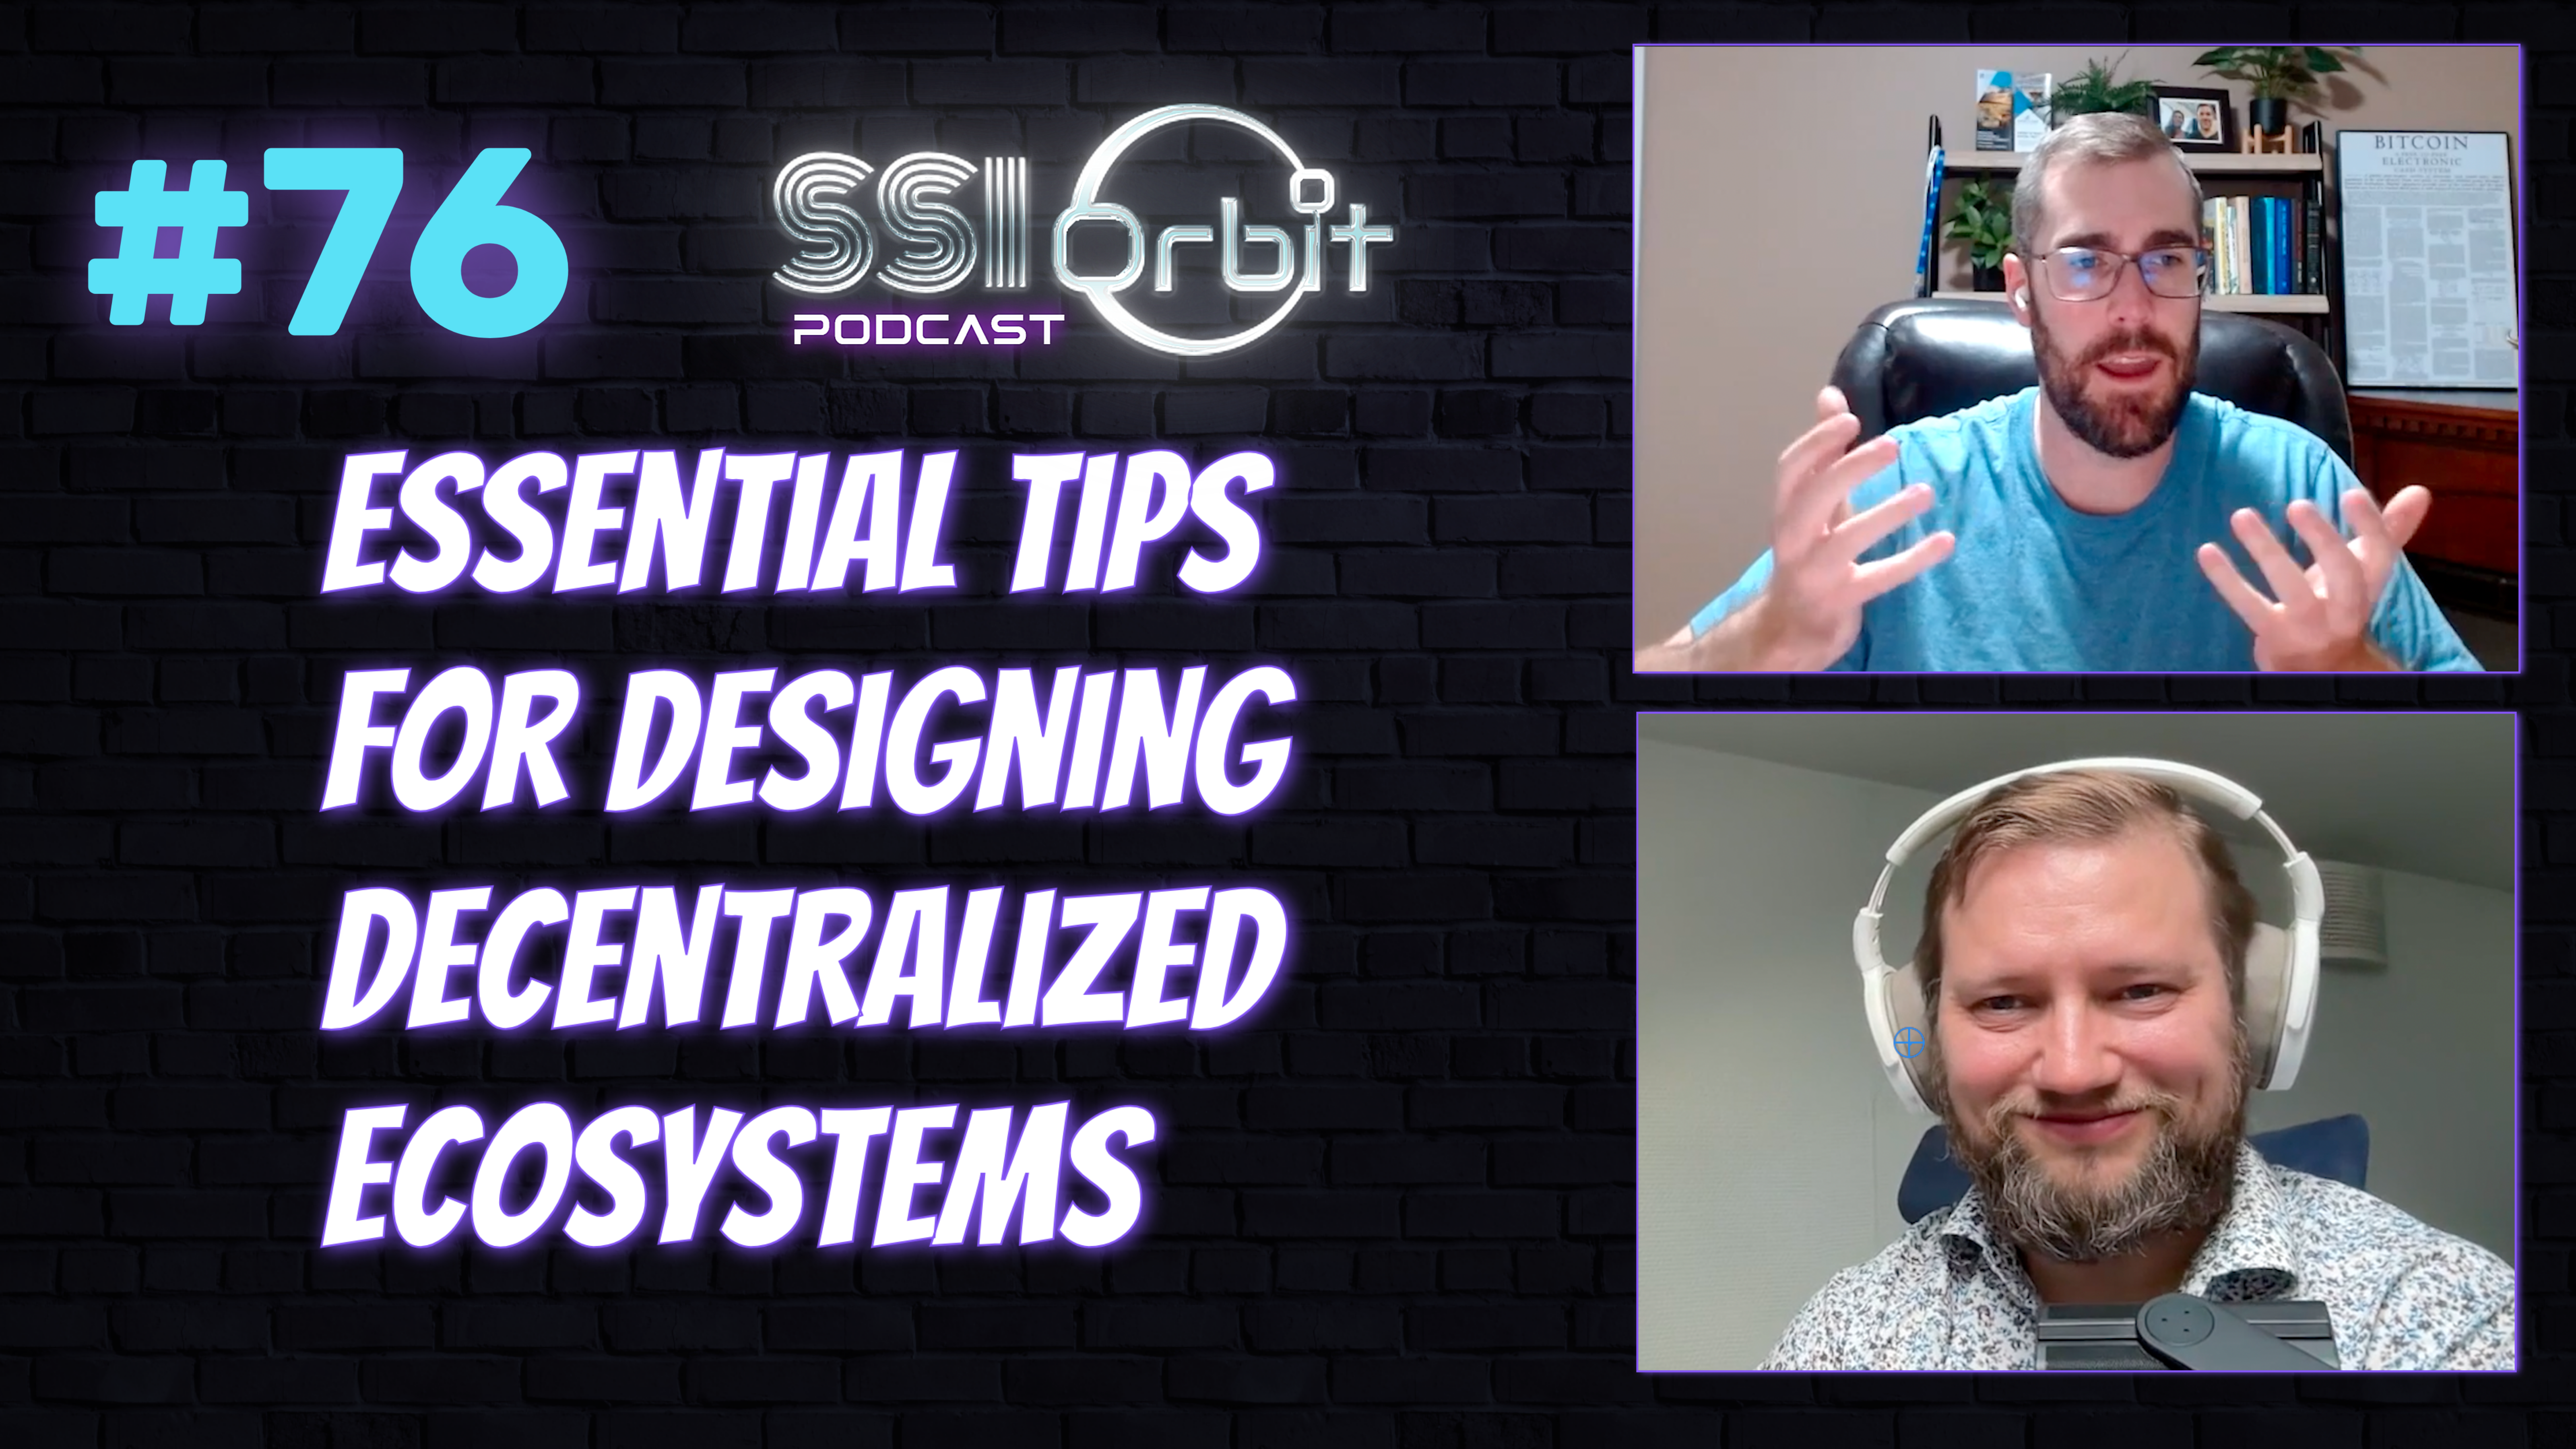 Essential Tips for Designing Decentralized Ecosystems (with Antti Kettunen)